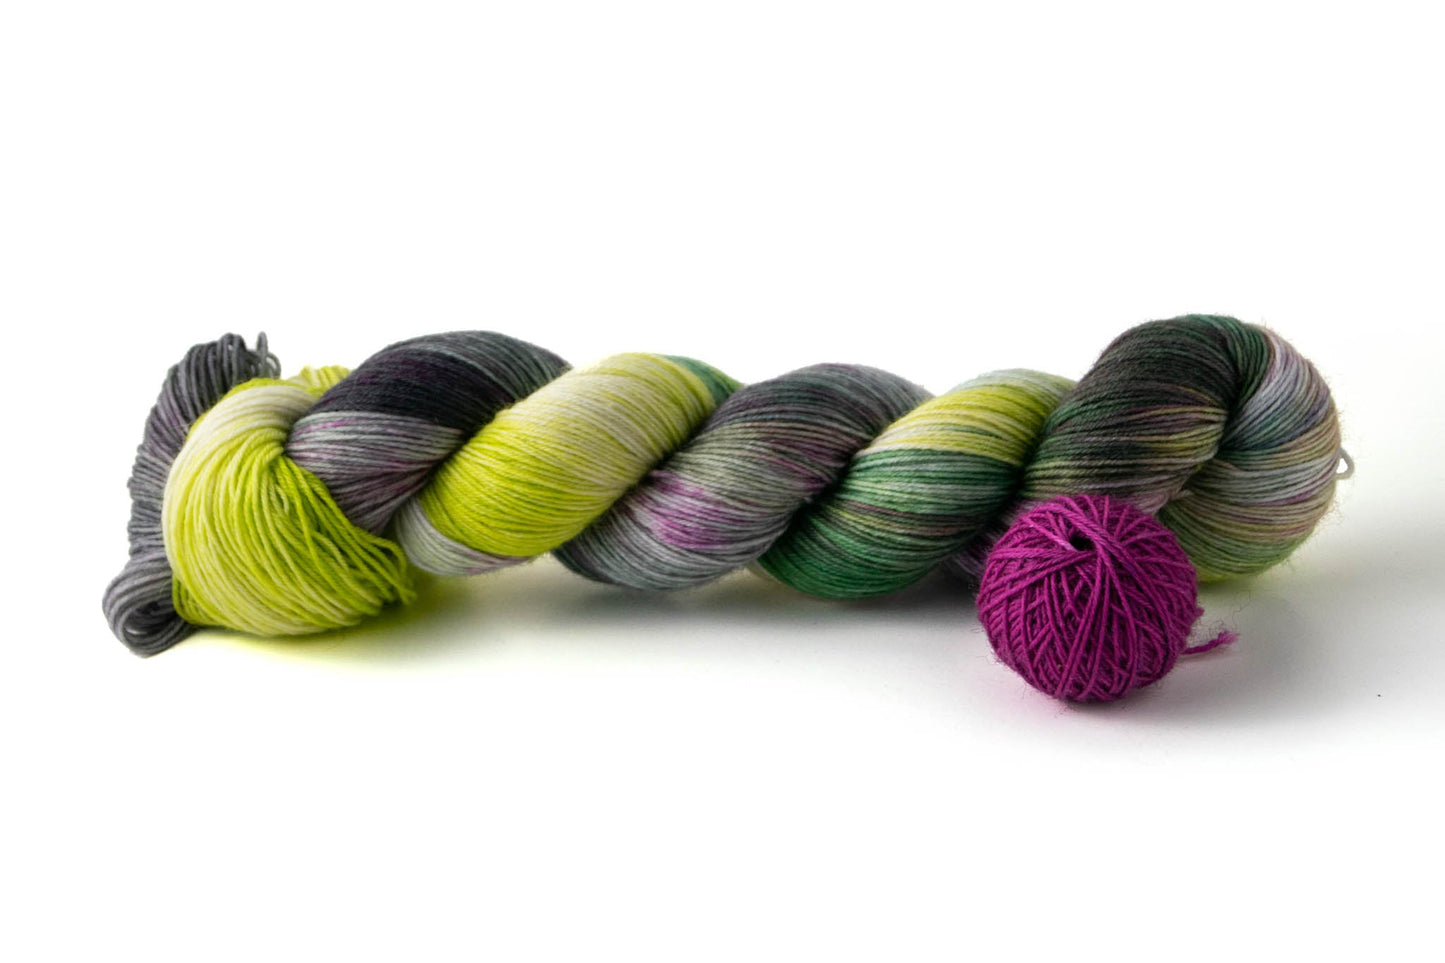 A skein of neon green, forest green, and gray hand-dyed wool yarn with pops of raspberry, next to a ball of magenta yarn.